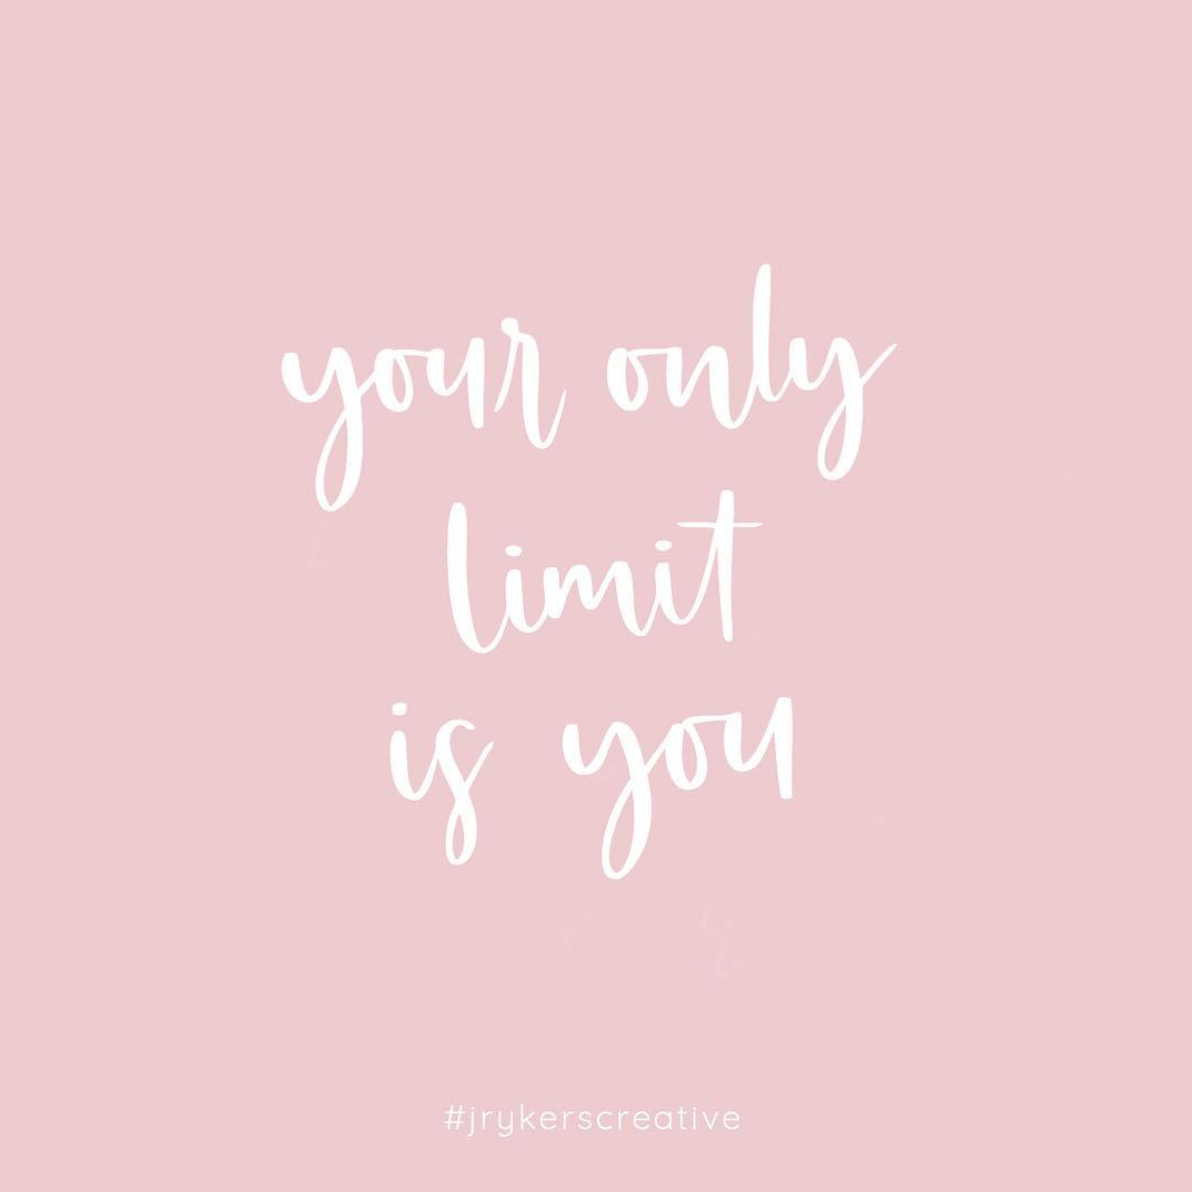 Friday Inspo - Your Only Limit...